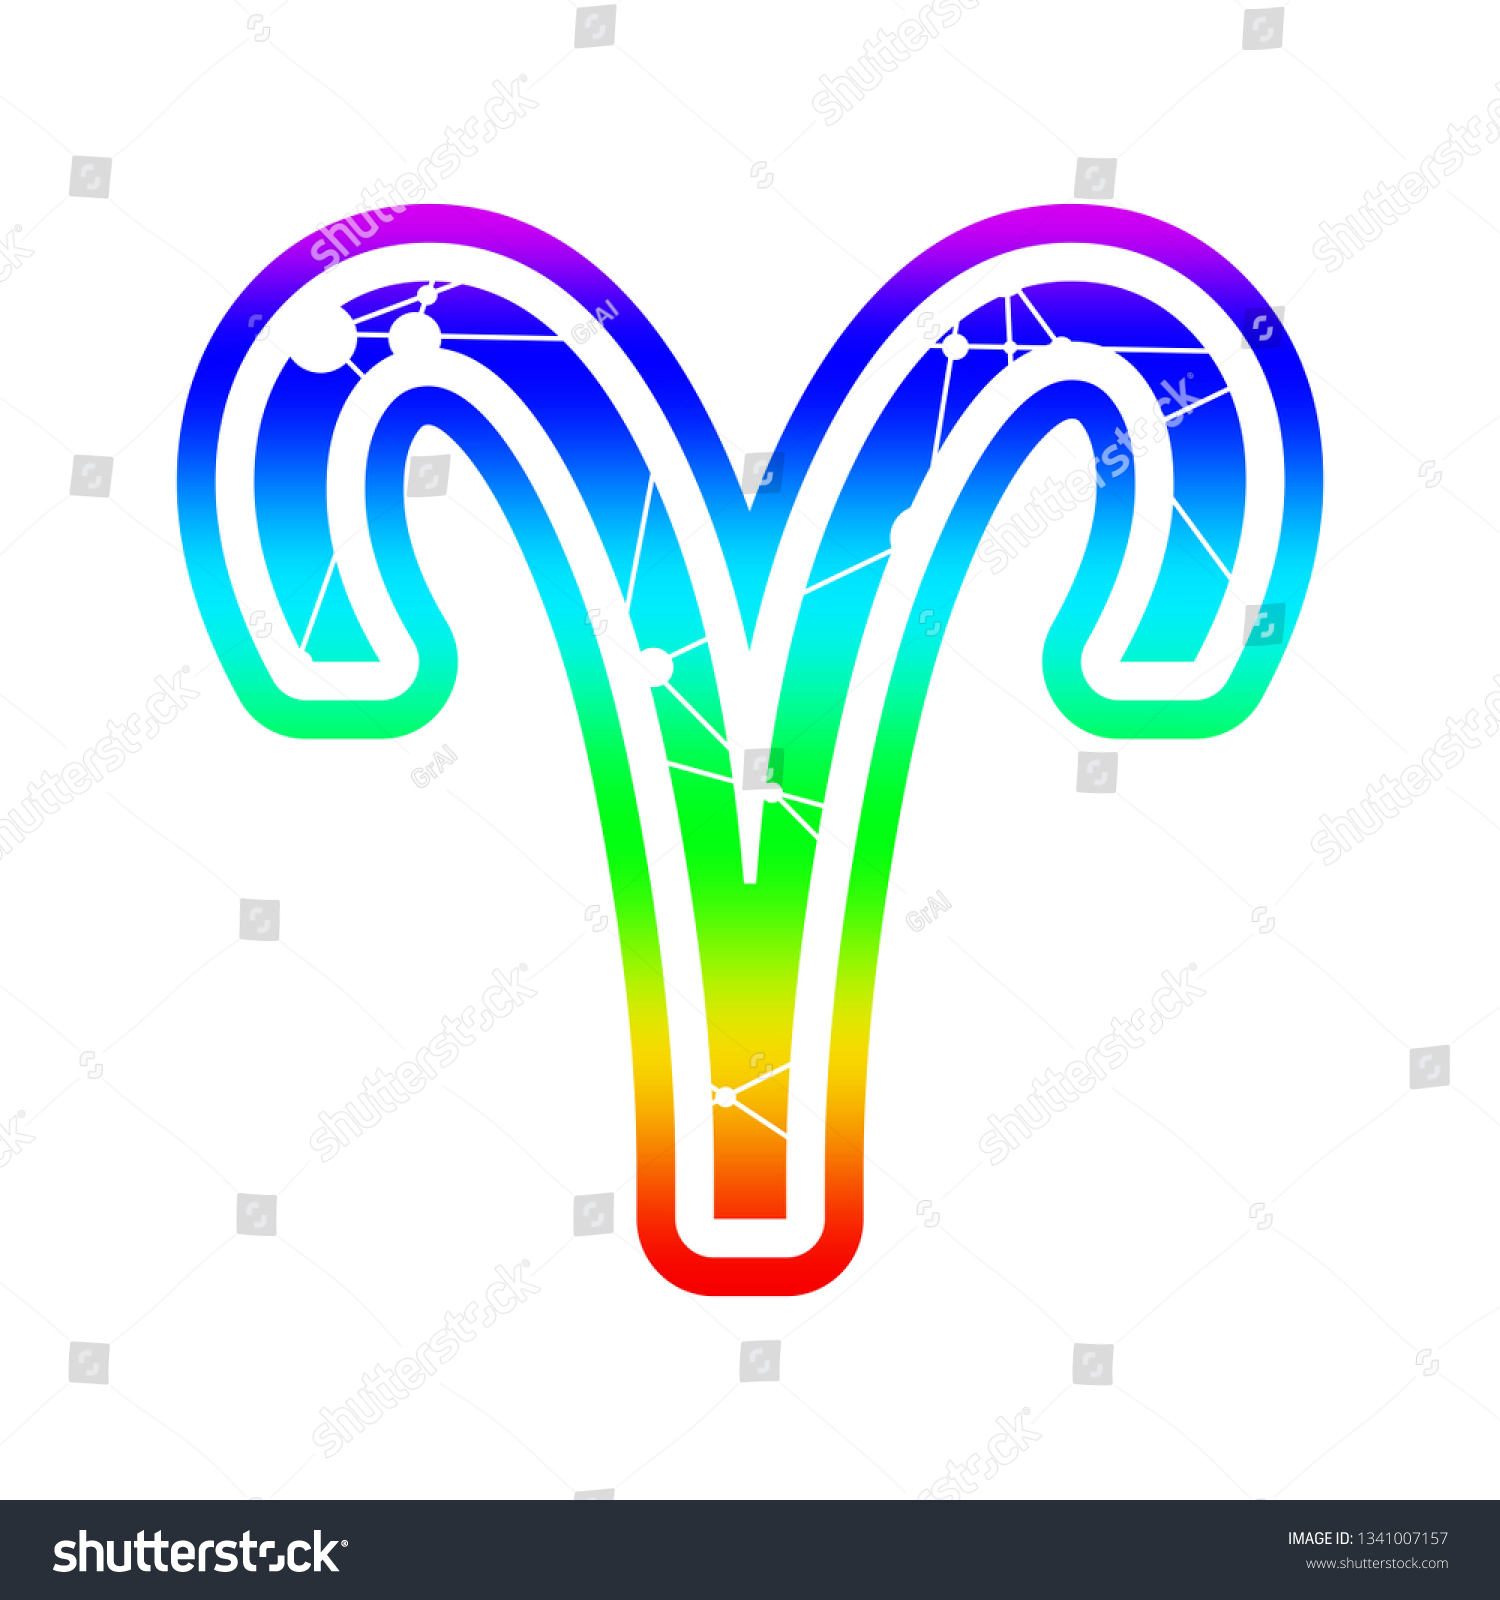 Zodiac Symbol Textured By Connected Lines Stock Vector (Royalty Free ...